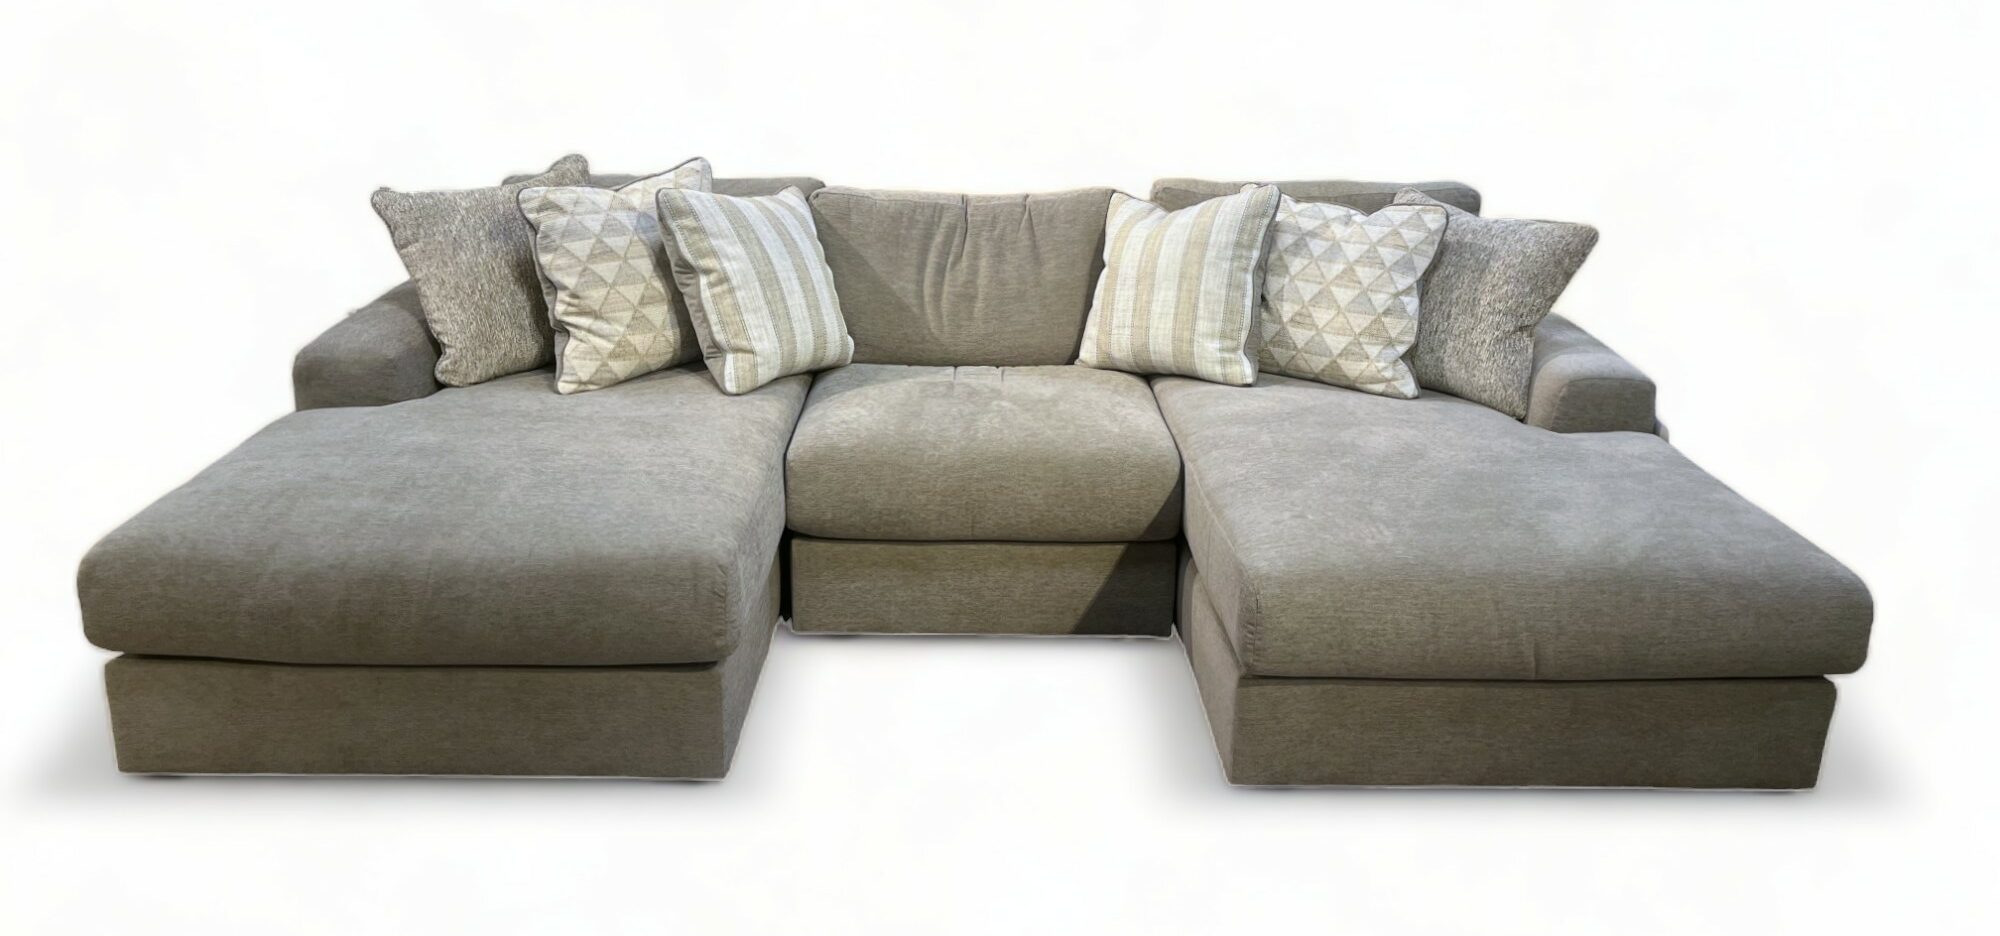 Avaliyah 3-Piece Double Chaise Sectional